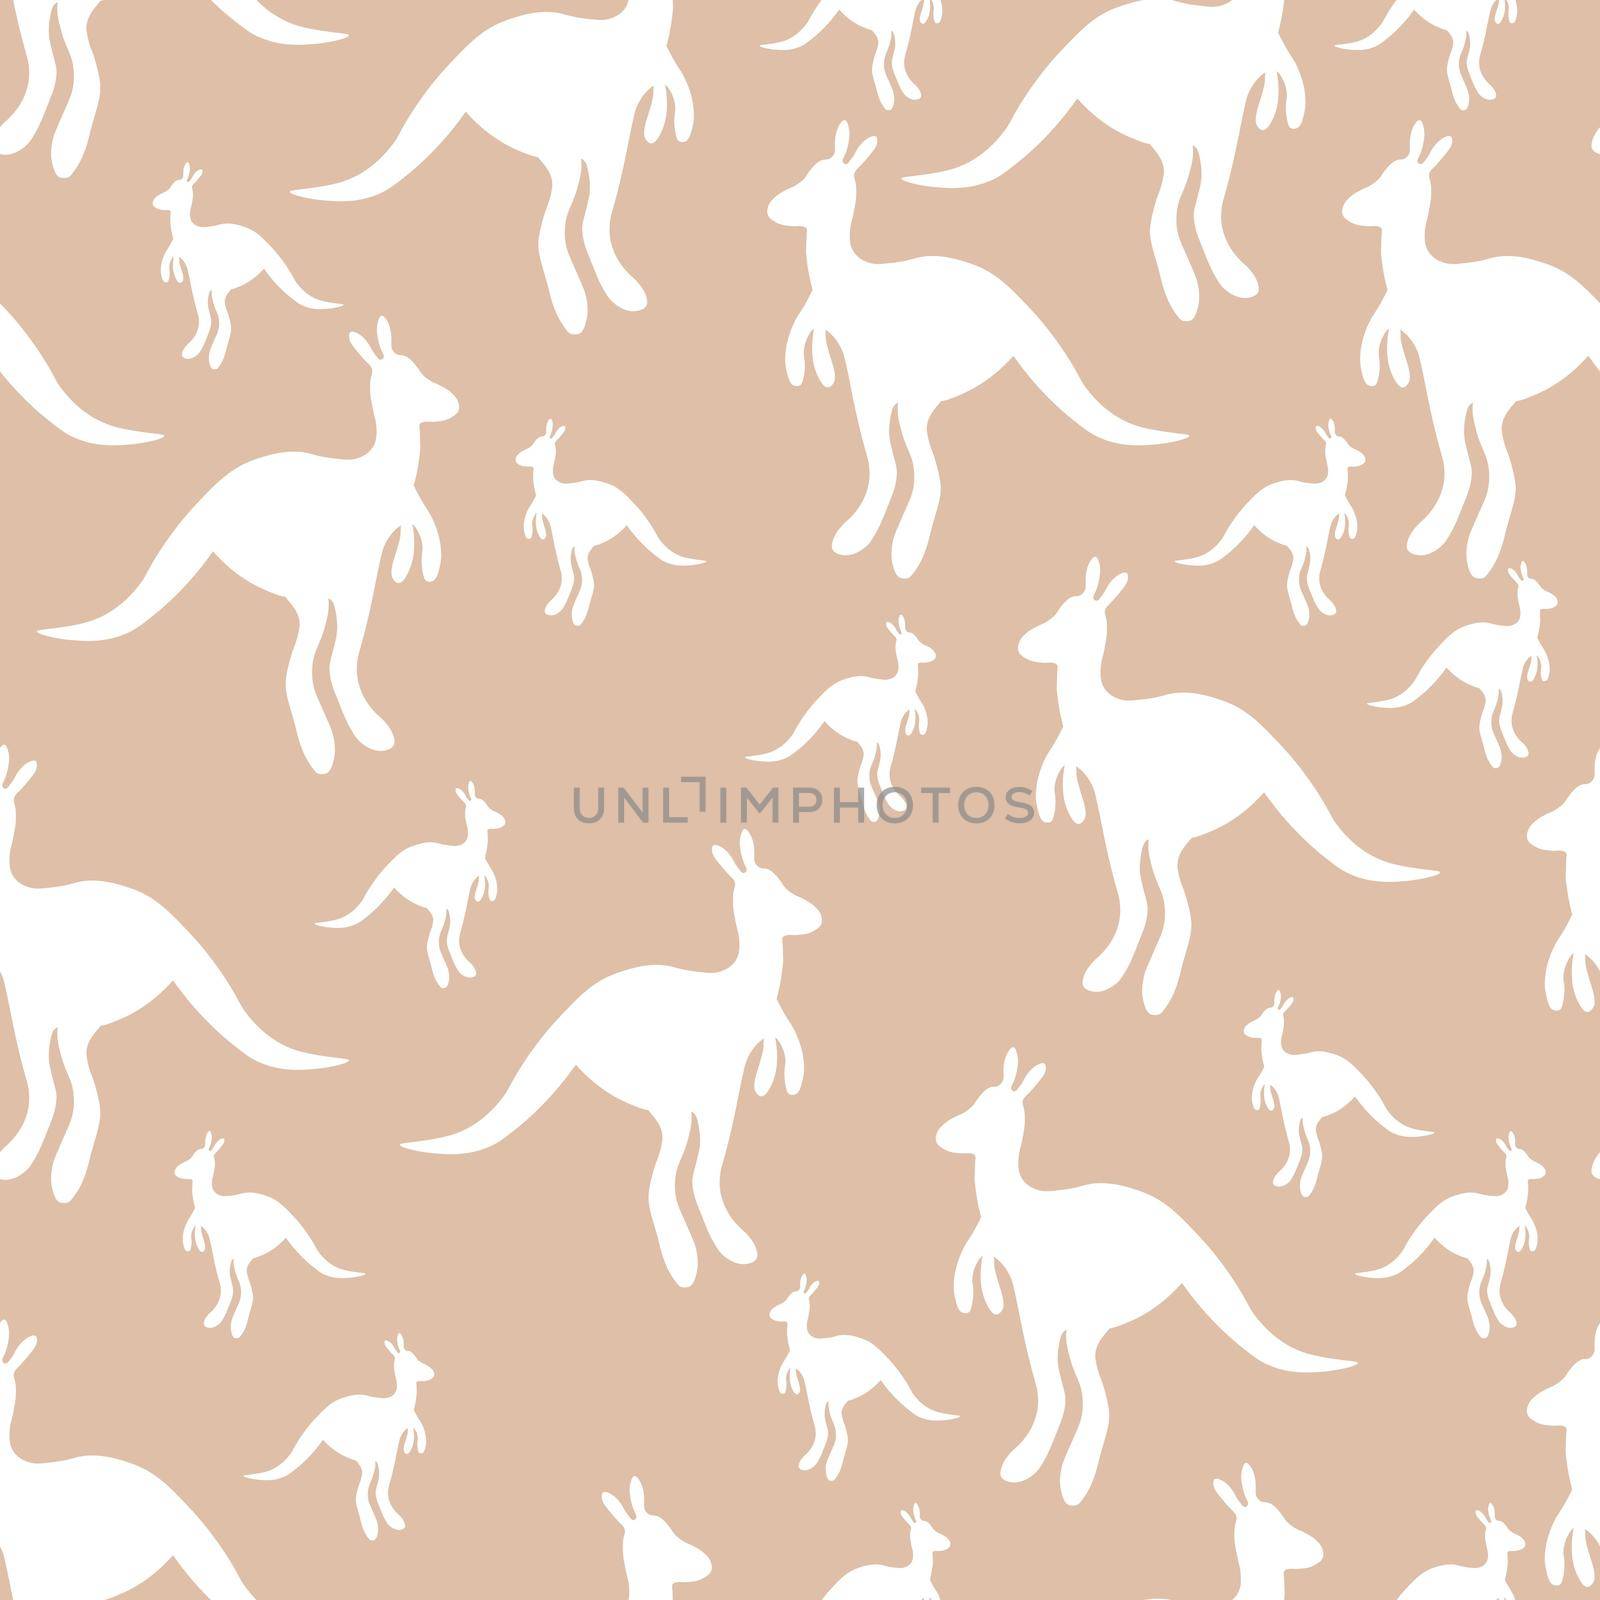 Vector flat illustration with silhouette kangaroo and baby kangaroo on fiery background. Seamless pattern on beige background. Design for card, poster, fabric, textile. Pray for Australia and animals by allaku